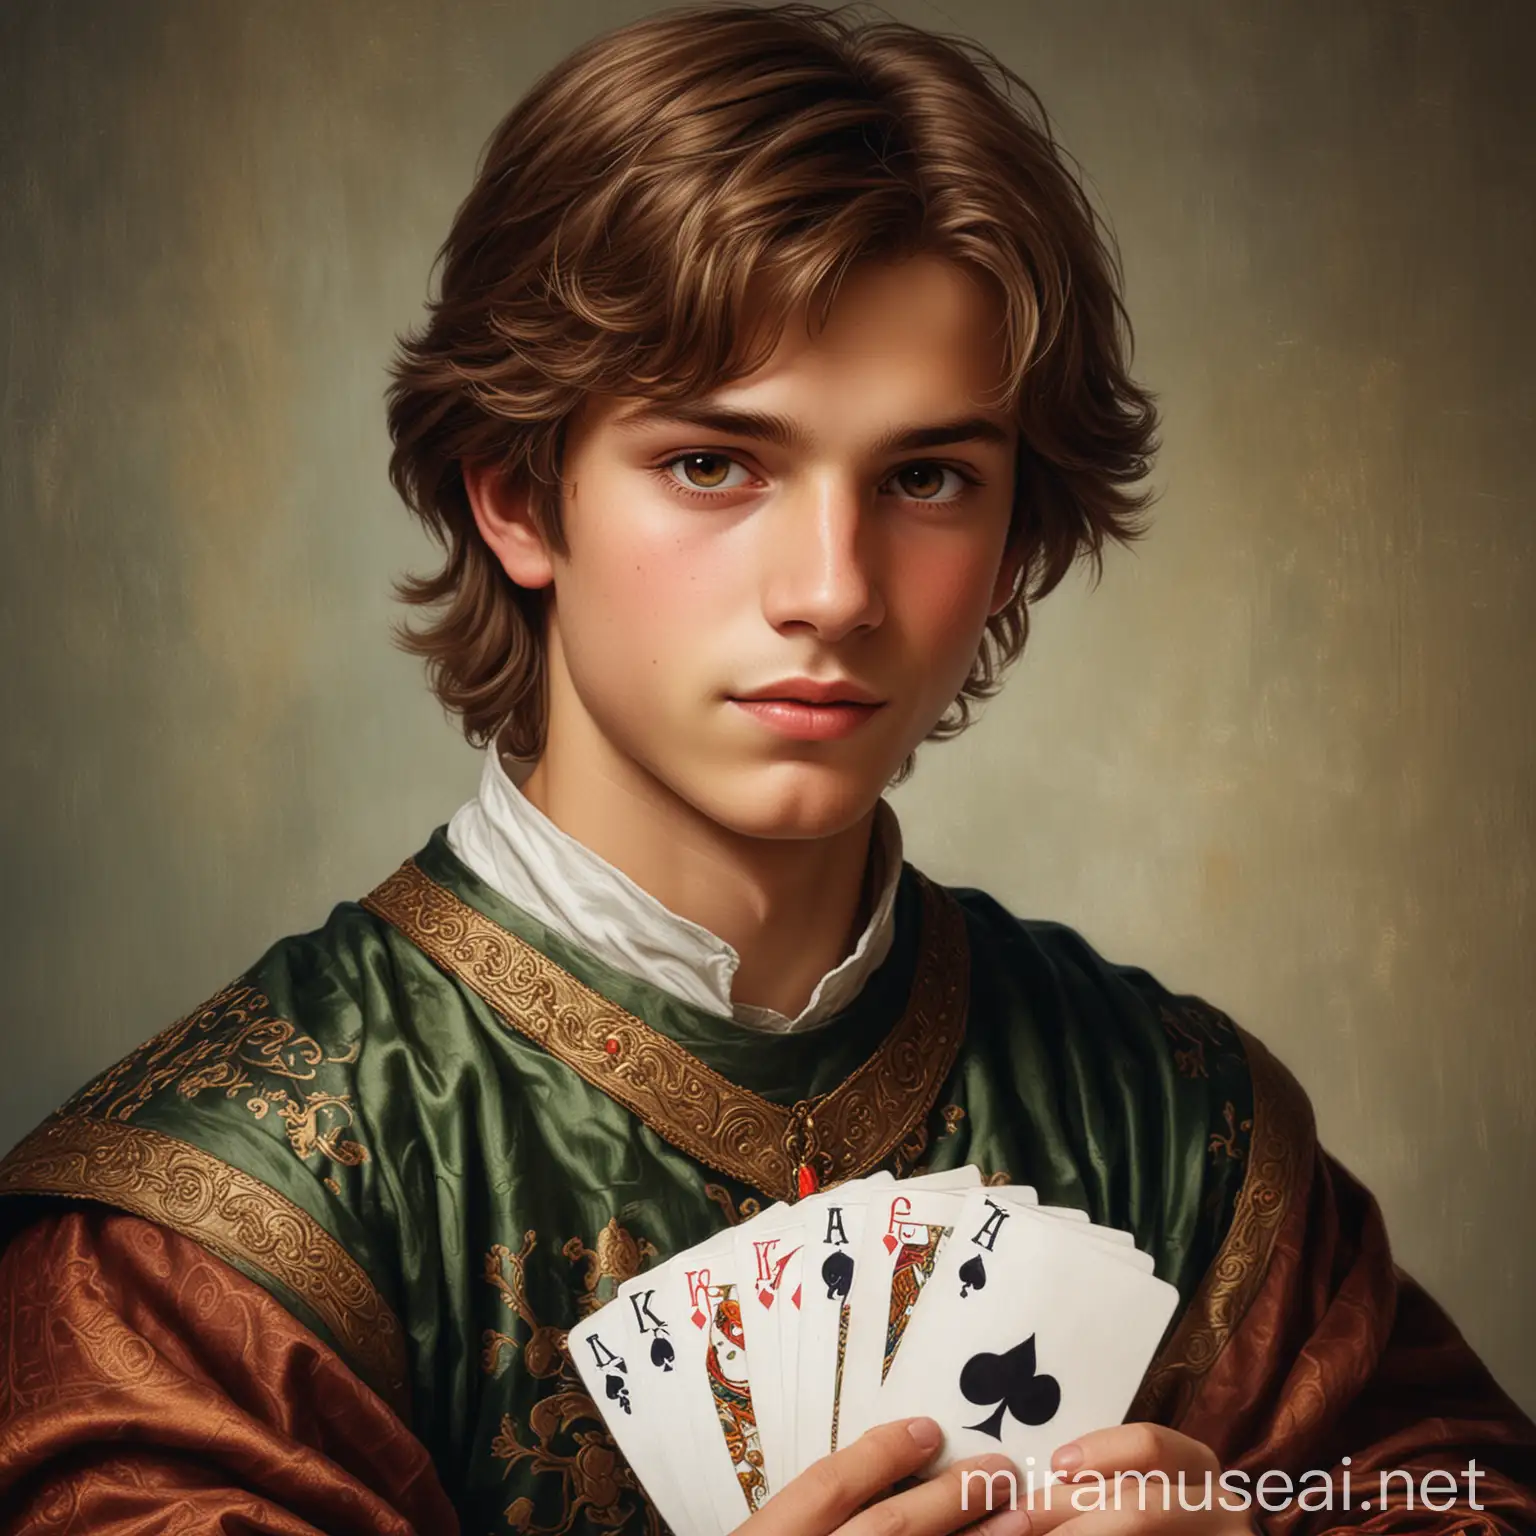 Medieval Prince Playing Cards with Brown Hair and Fair Skin